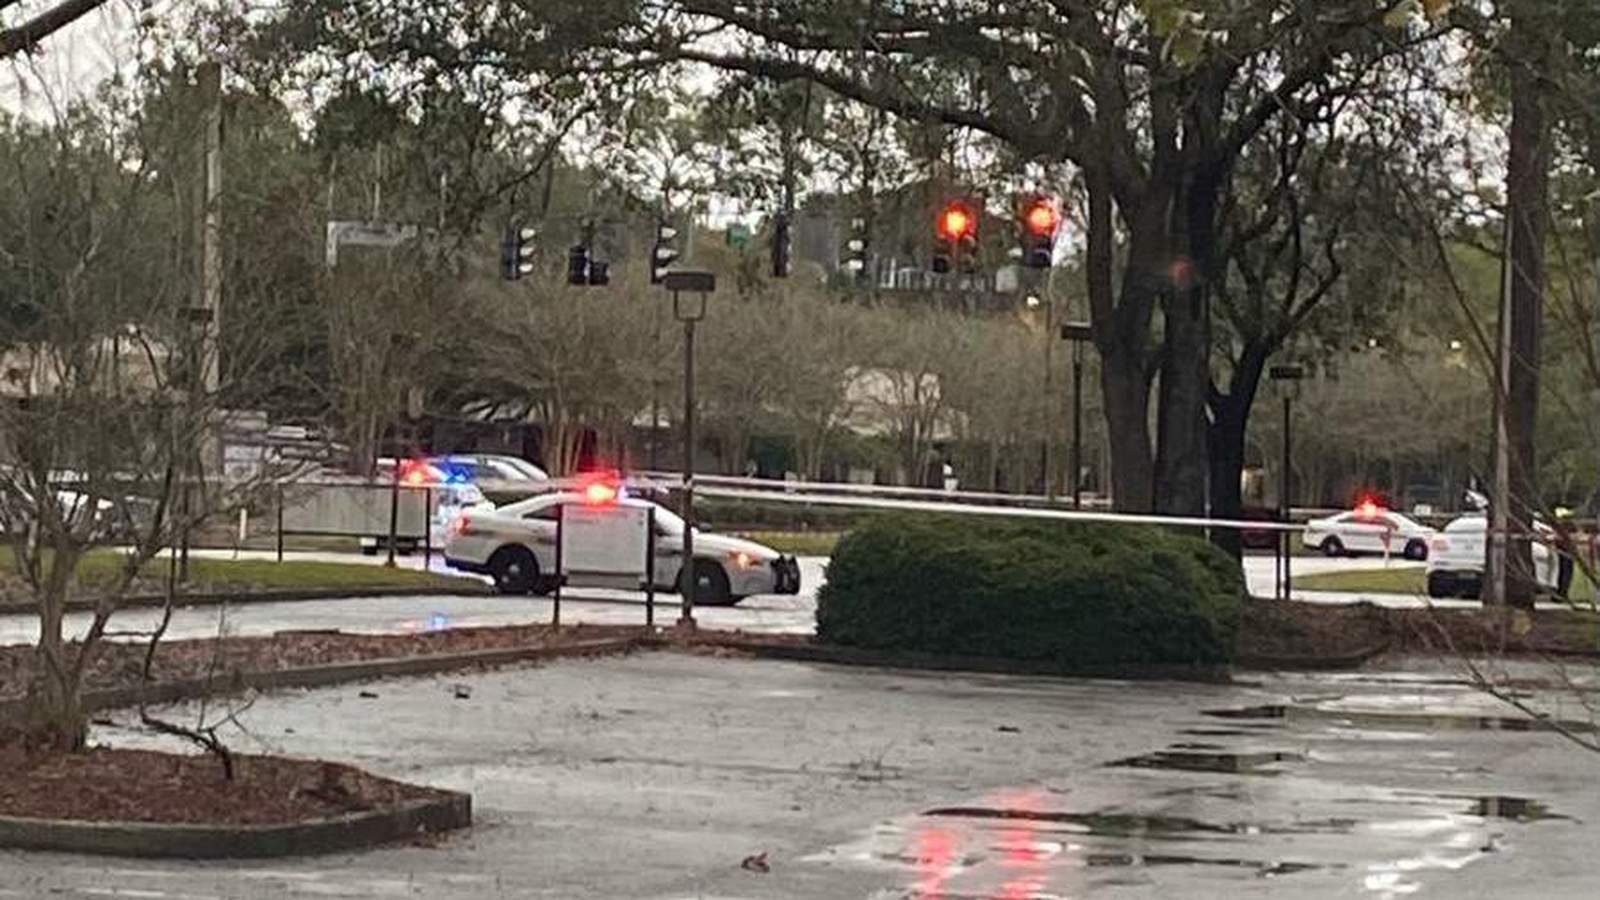 Armed robbery suspect dies after Baymeadows police chase, JSO says